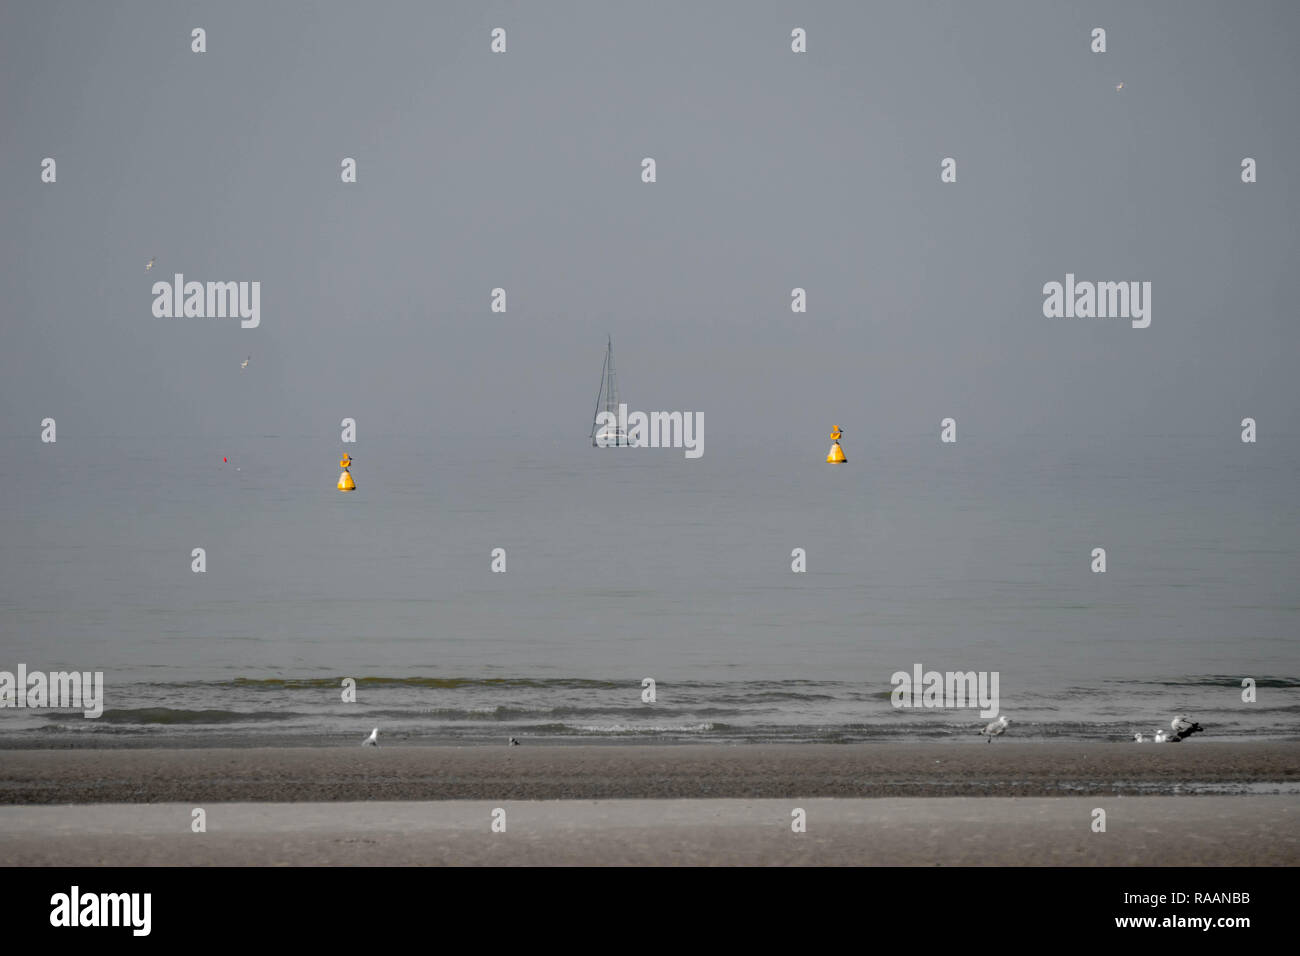 Single sailboat between buoys slightly off beach in northern France, Stock Photo